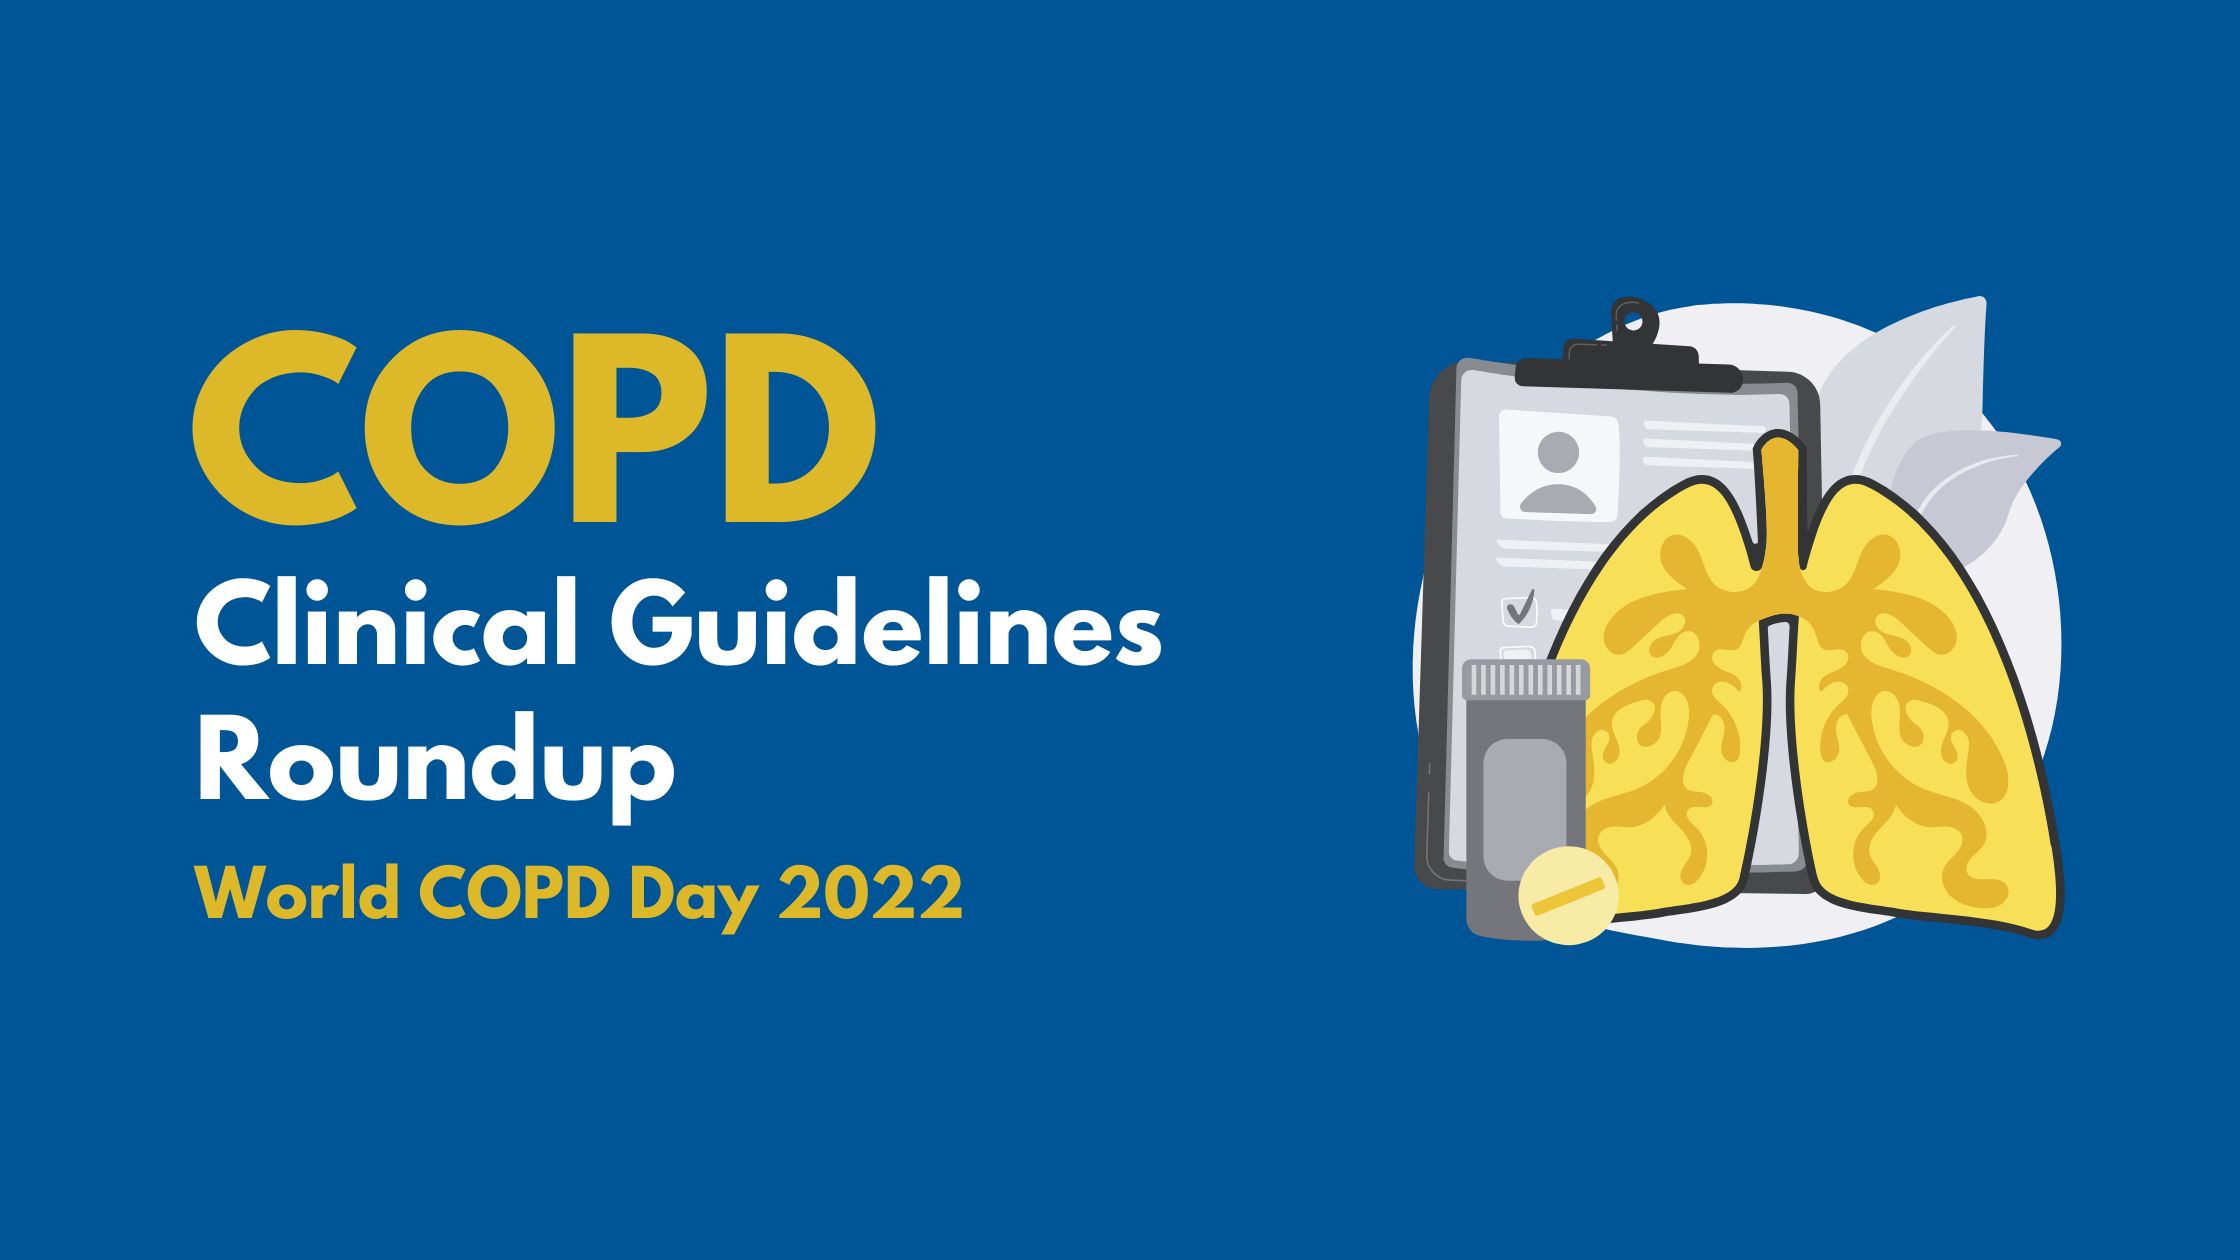 COPD Clinical Guidelines Roundup for World COPD Day 2022 Hero Image